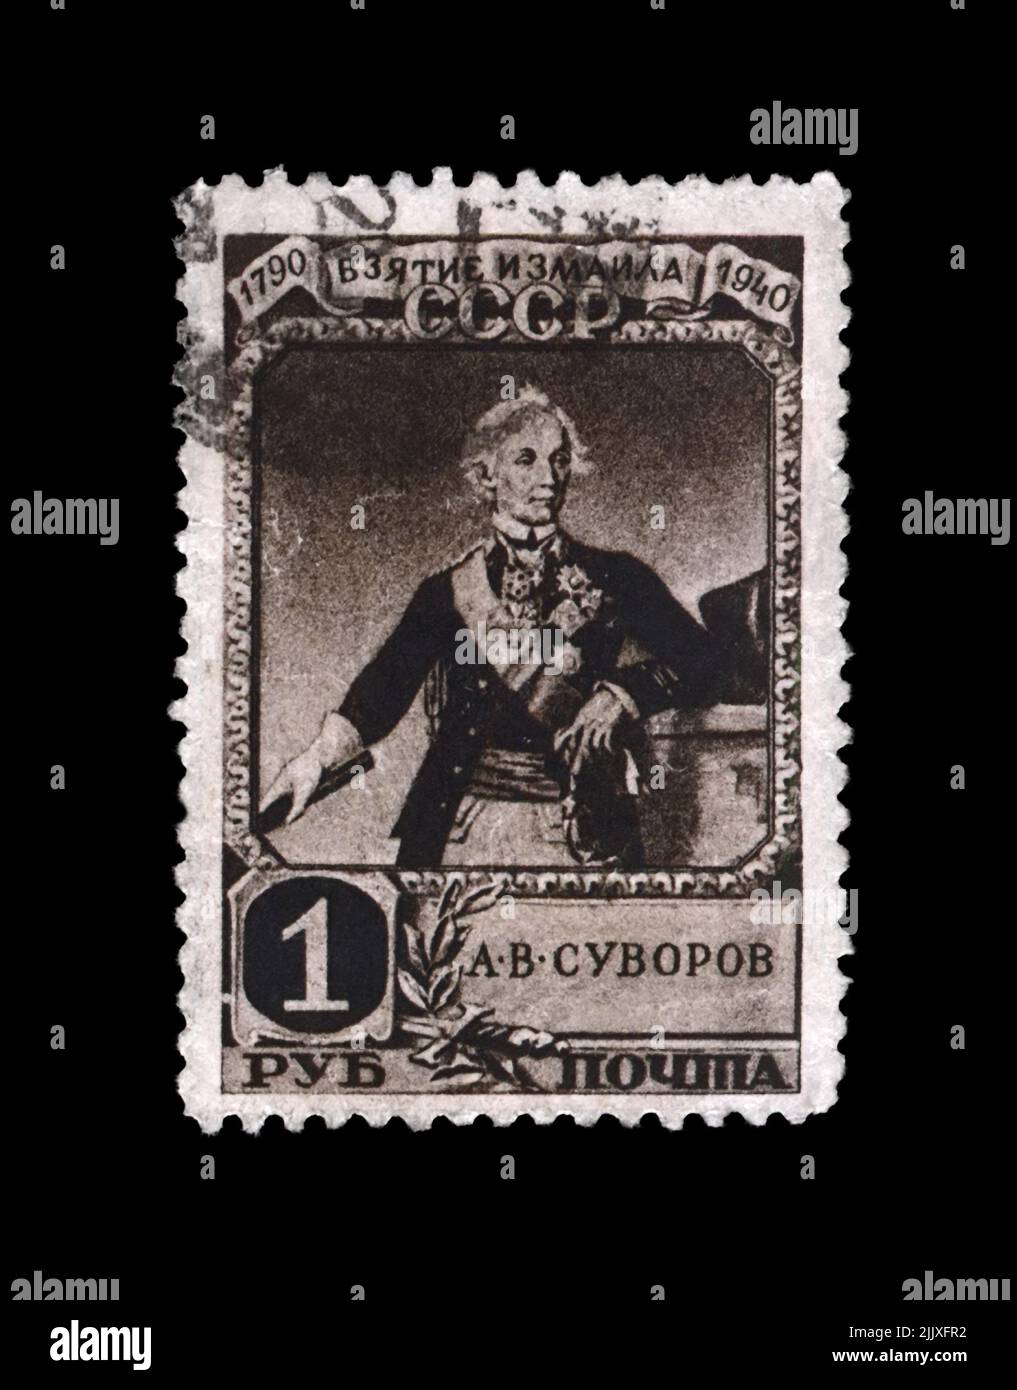 Alexander Suvorov (1730-1800), famous russian military commander, marshal; 150th anniversary of the capture of the Turkish fortress Ismail, circa 1941 Stock Photo